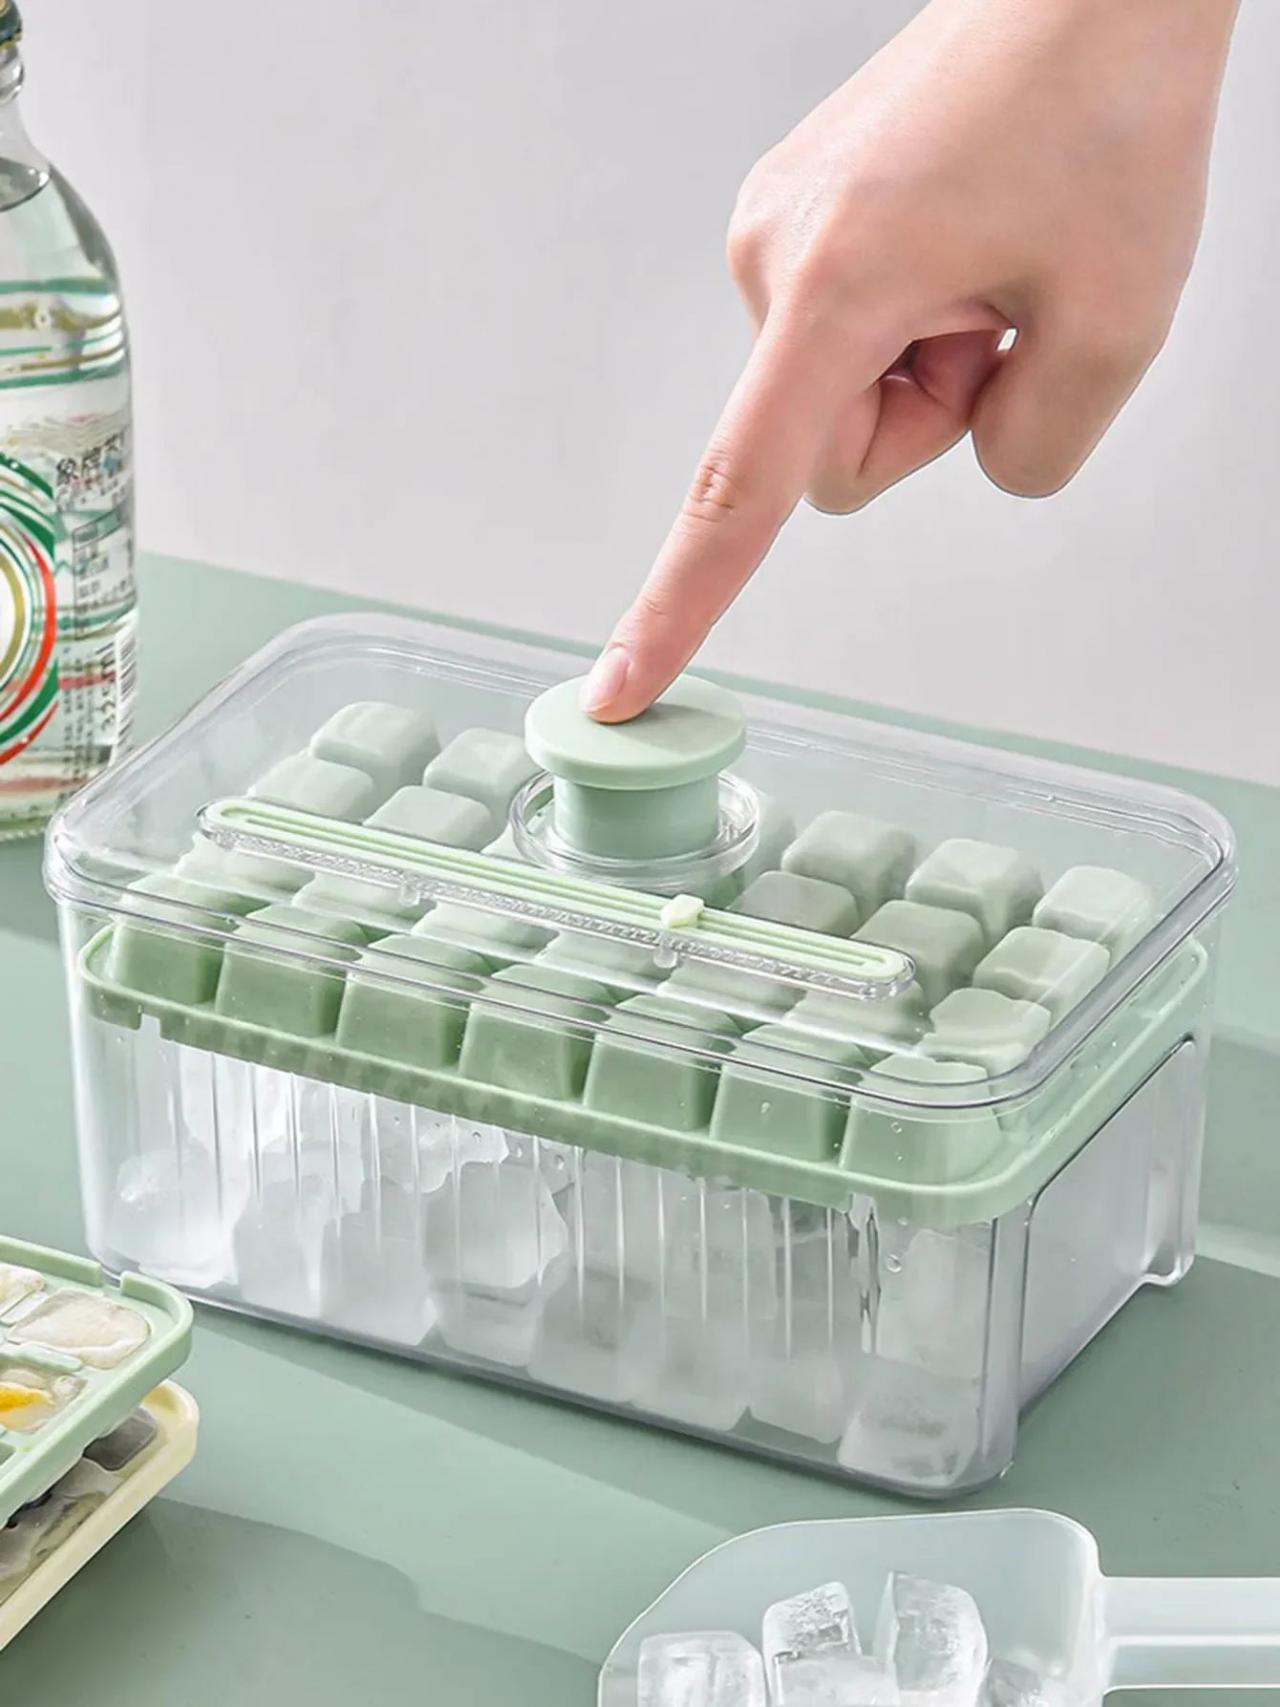 Easy Push Pop-out Silicone Ice Cube Tray With Lid